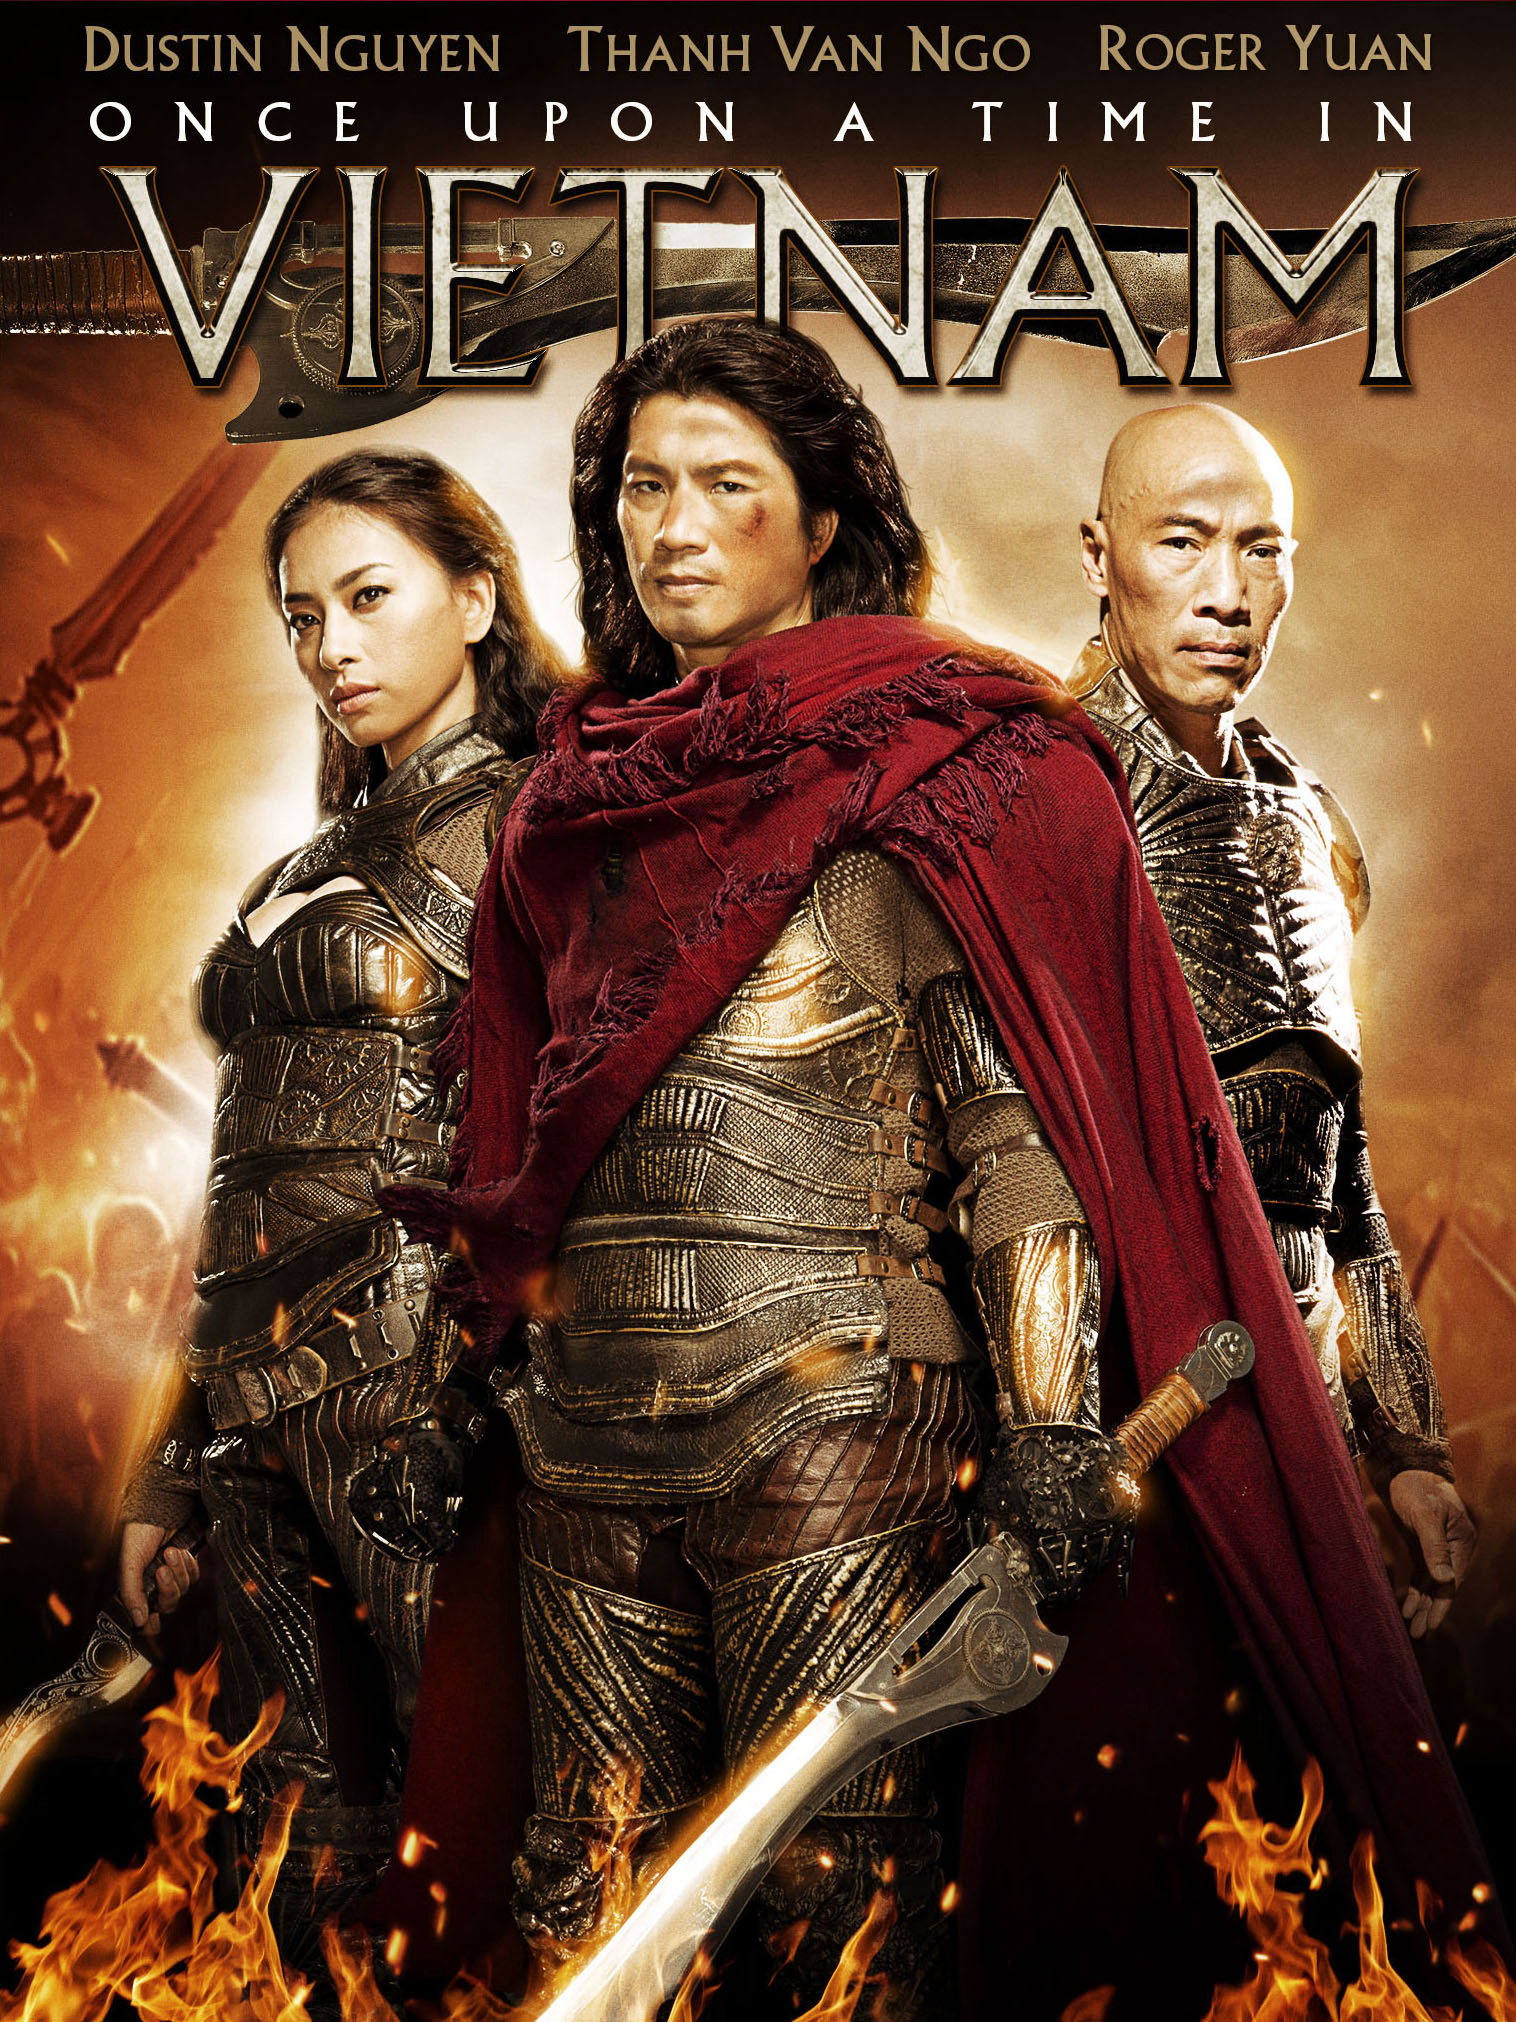 Poster Phim Lửa Phật (Once Upon a Time in Vietnam)